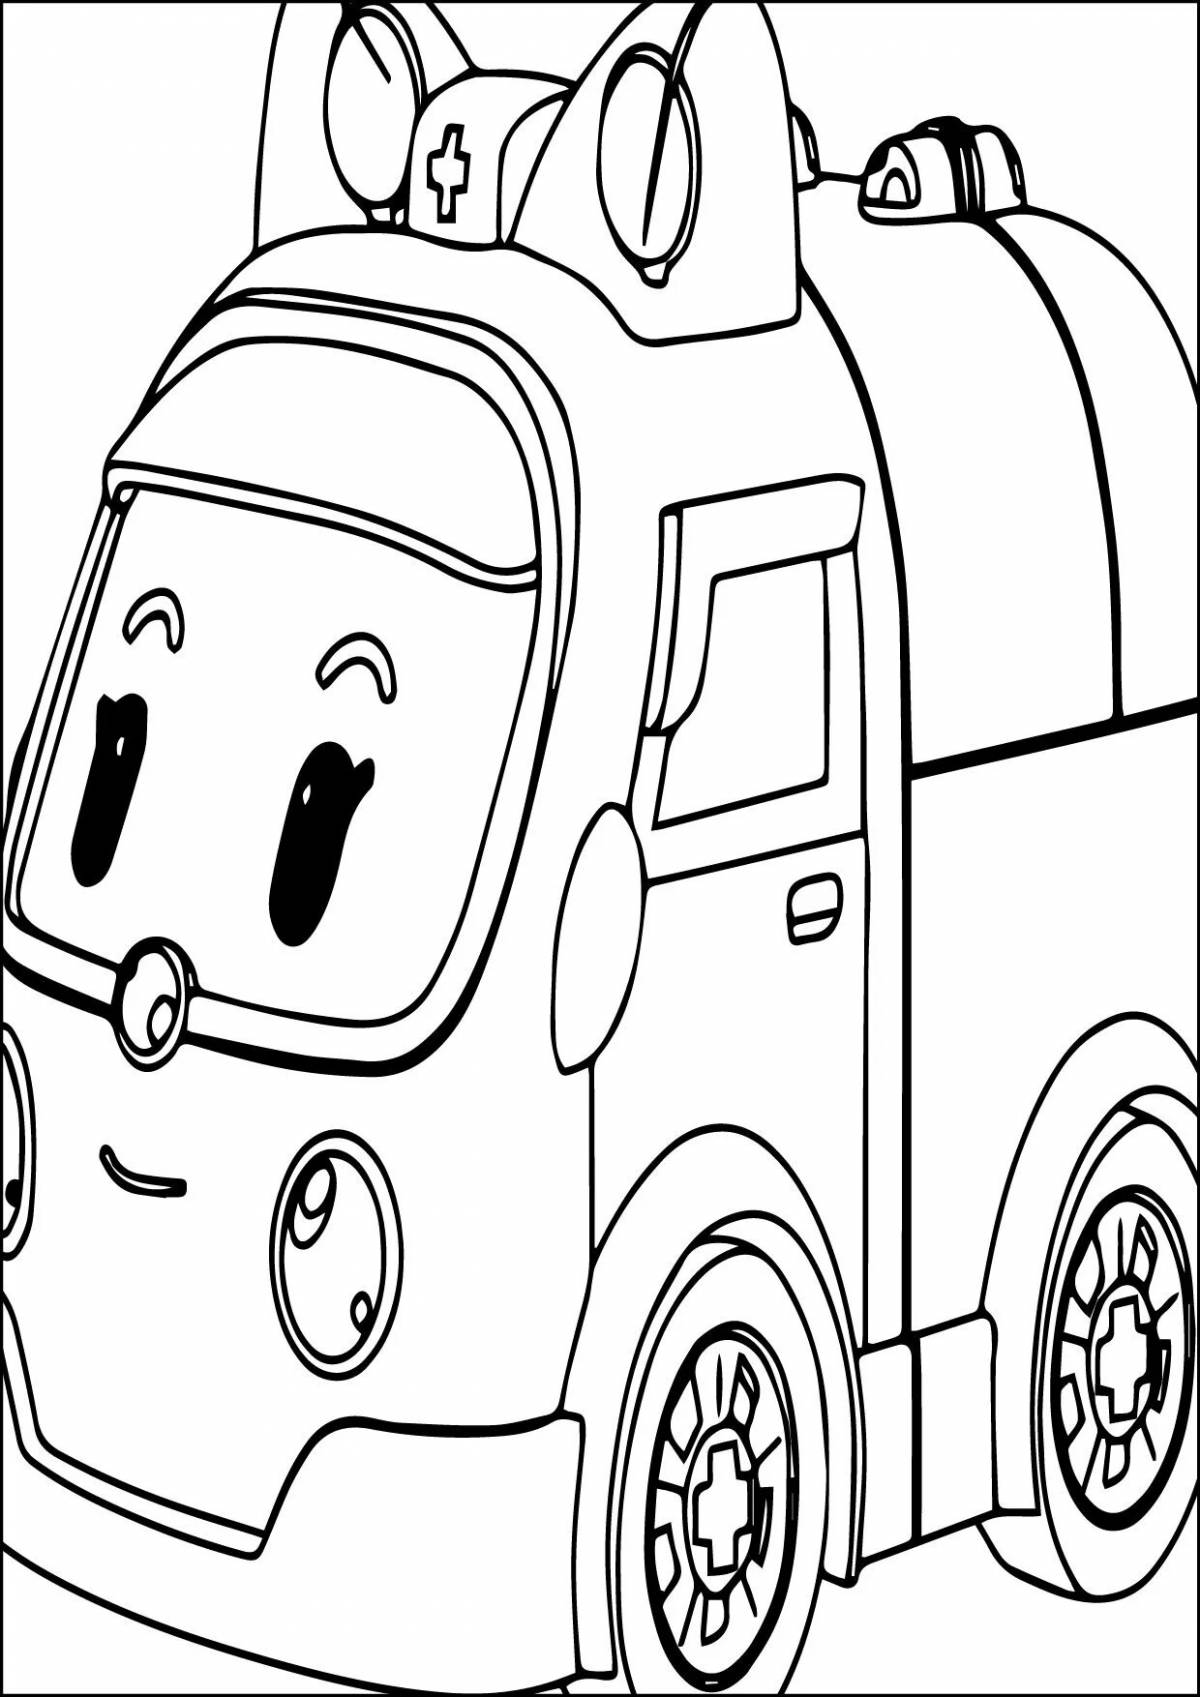 Color-marvelous ember coloring page for kids